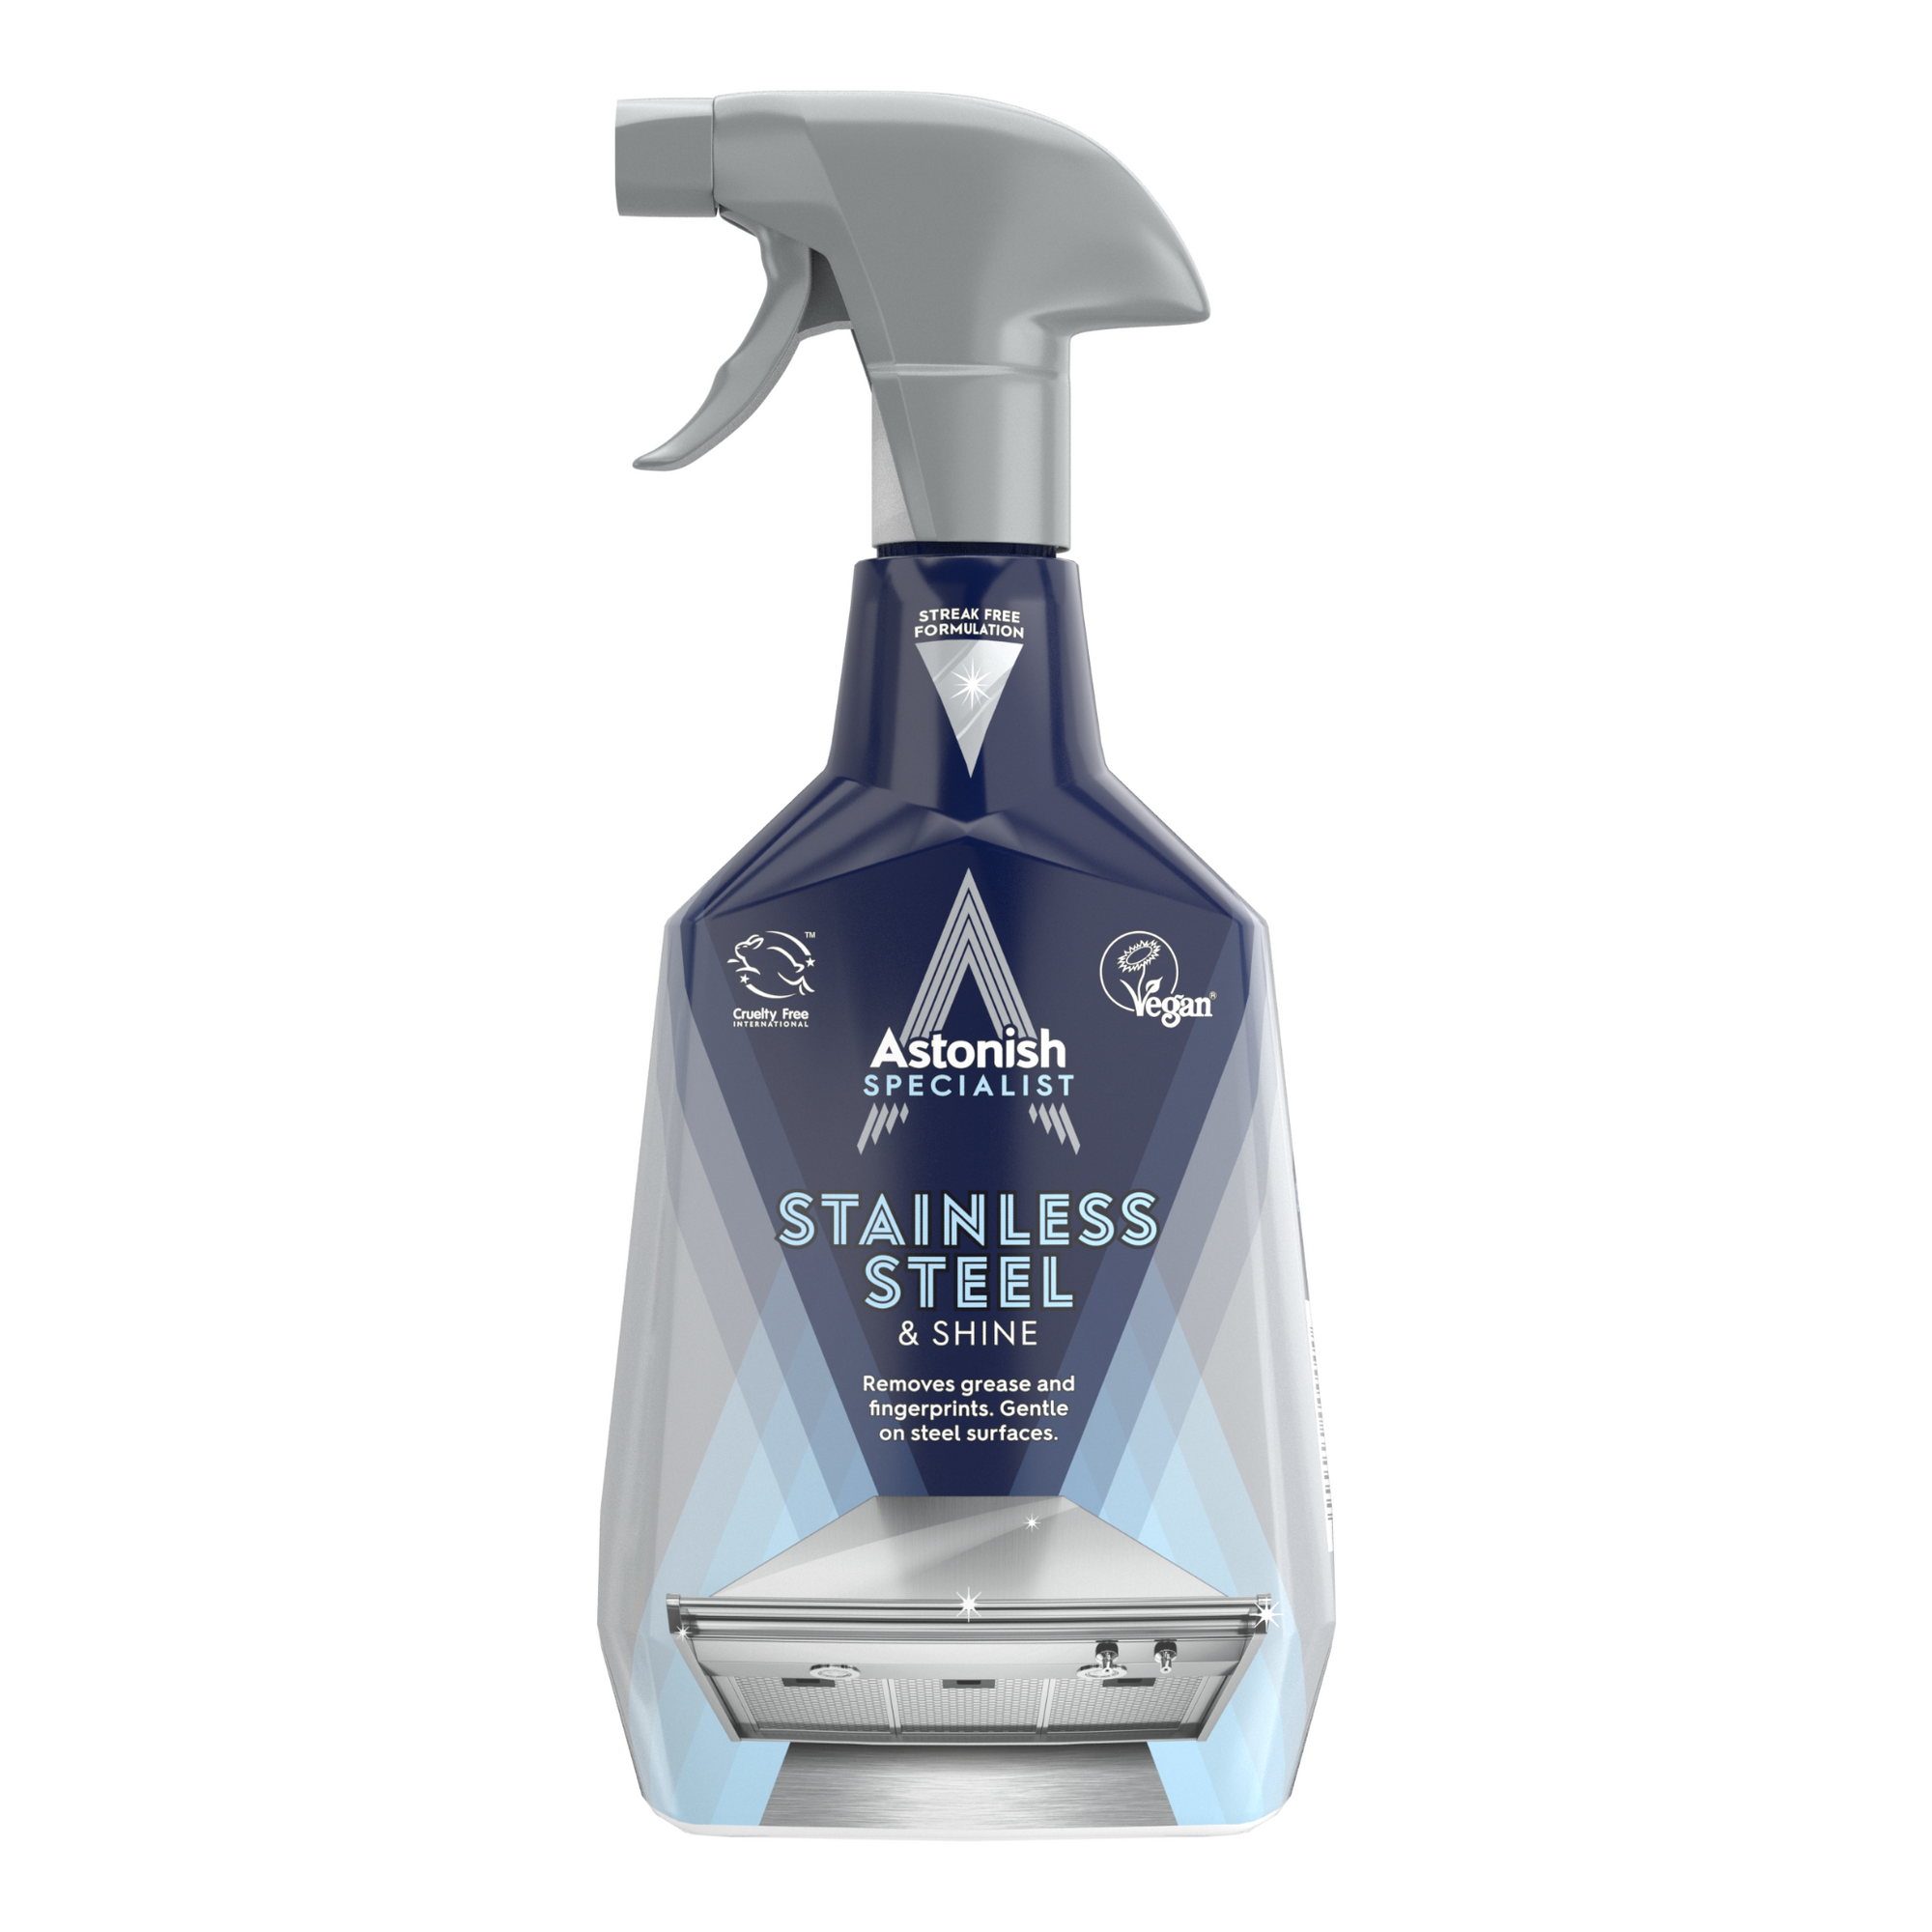 Astonish Specialist Stainless Steel and Shine (750ml)